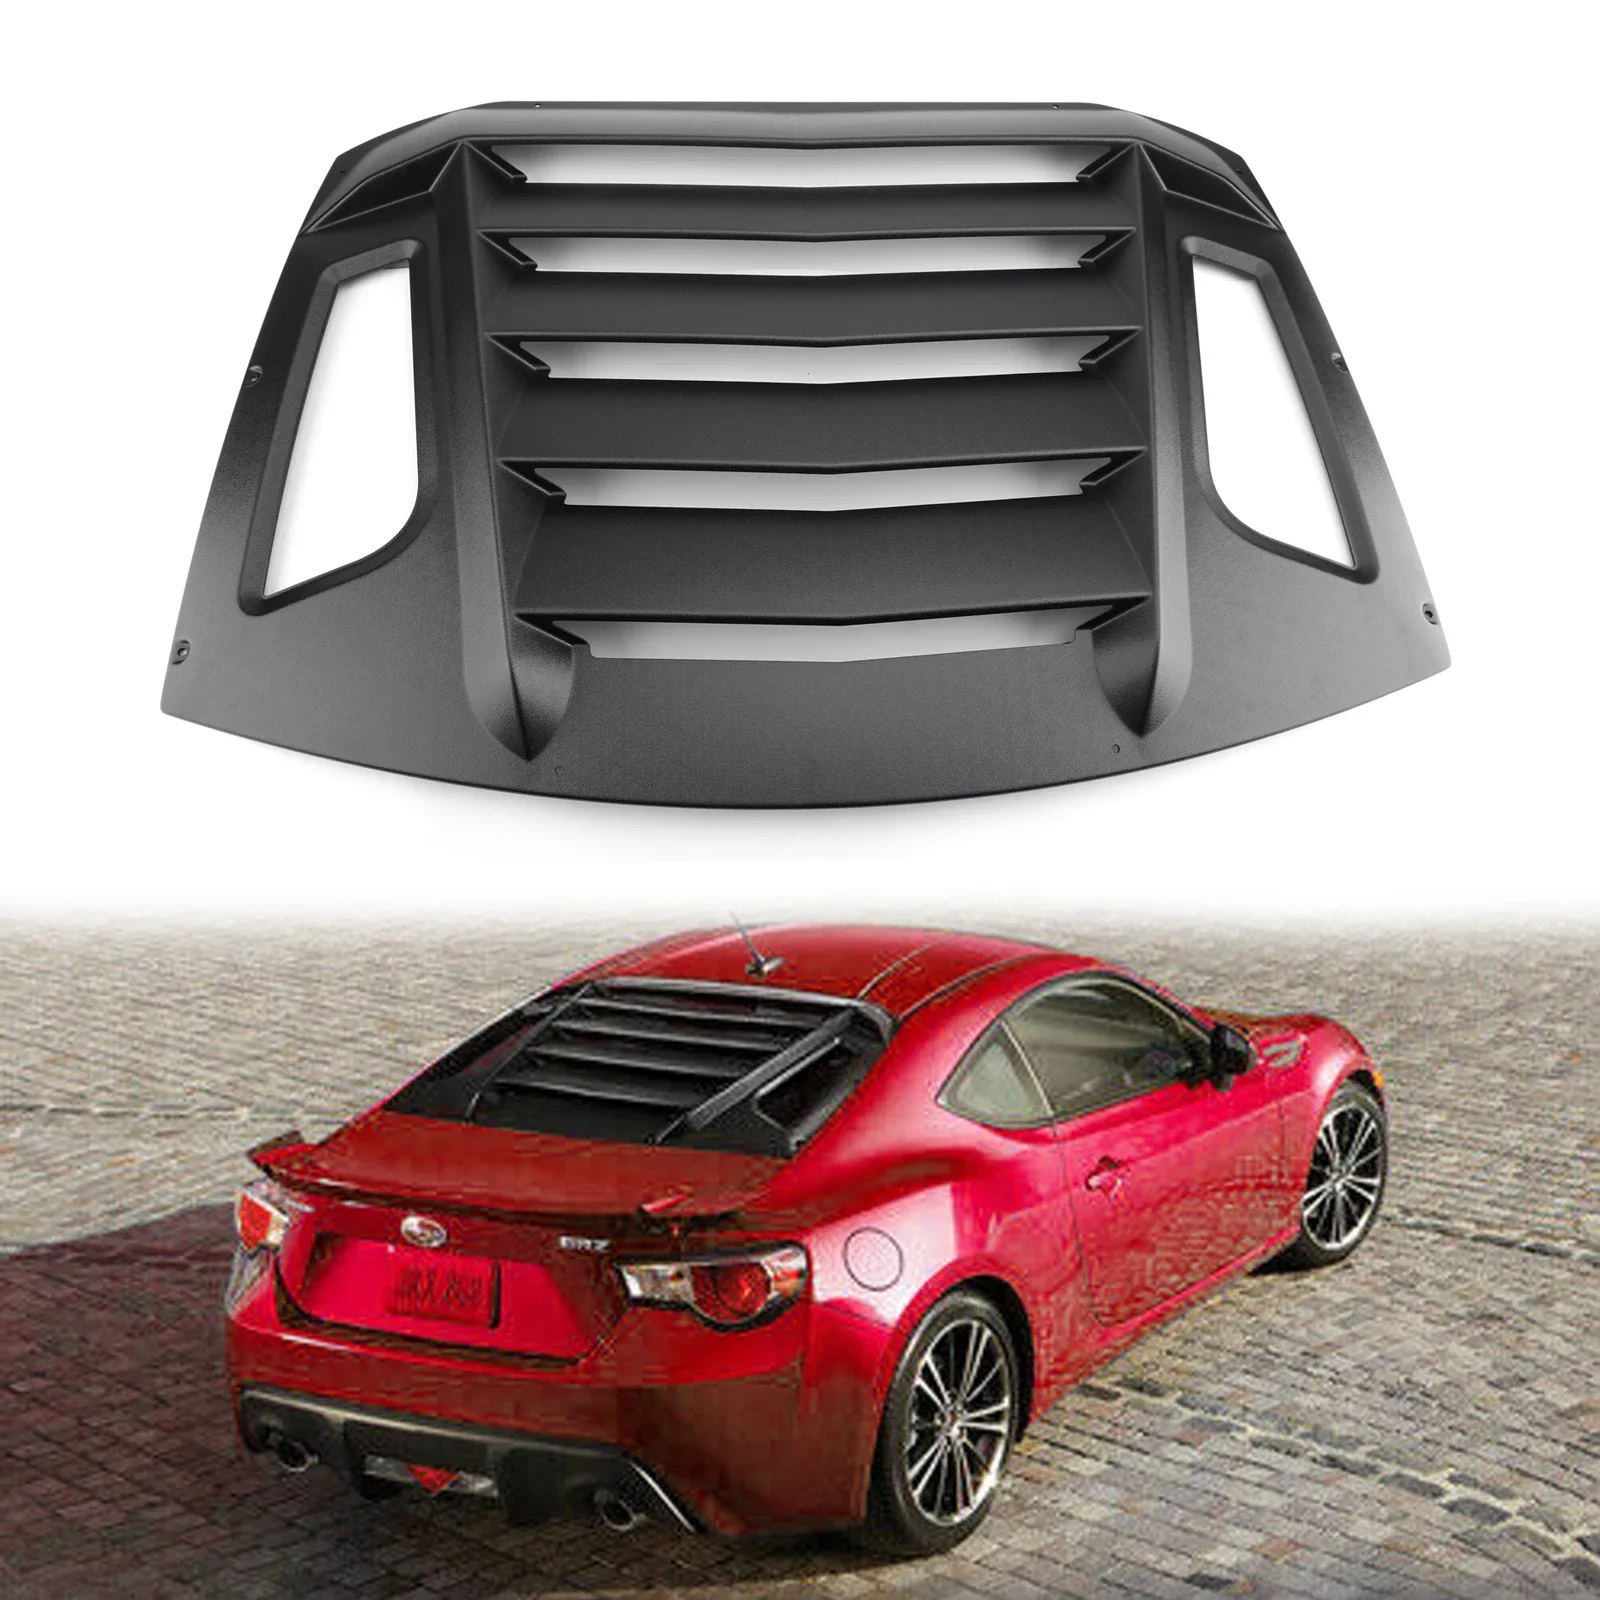 nbjkato brand new genuine 83071fg090 power master window switch driver left for subaru forester 2007 2011 Areyourshop Rear Window Louver Sun Shade Cover For Subaru BRZ/Scion FR-S For  GT86 2013-2018 custom